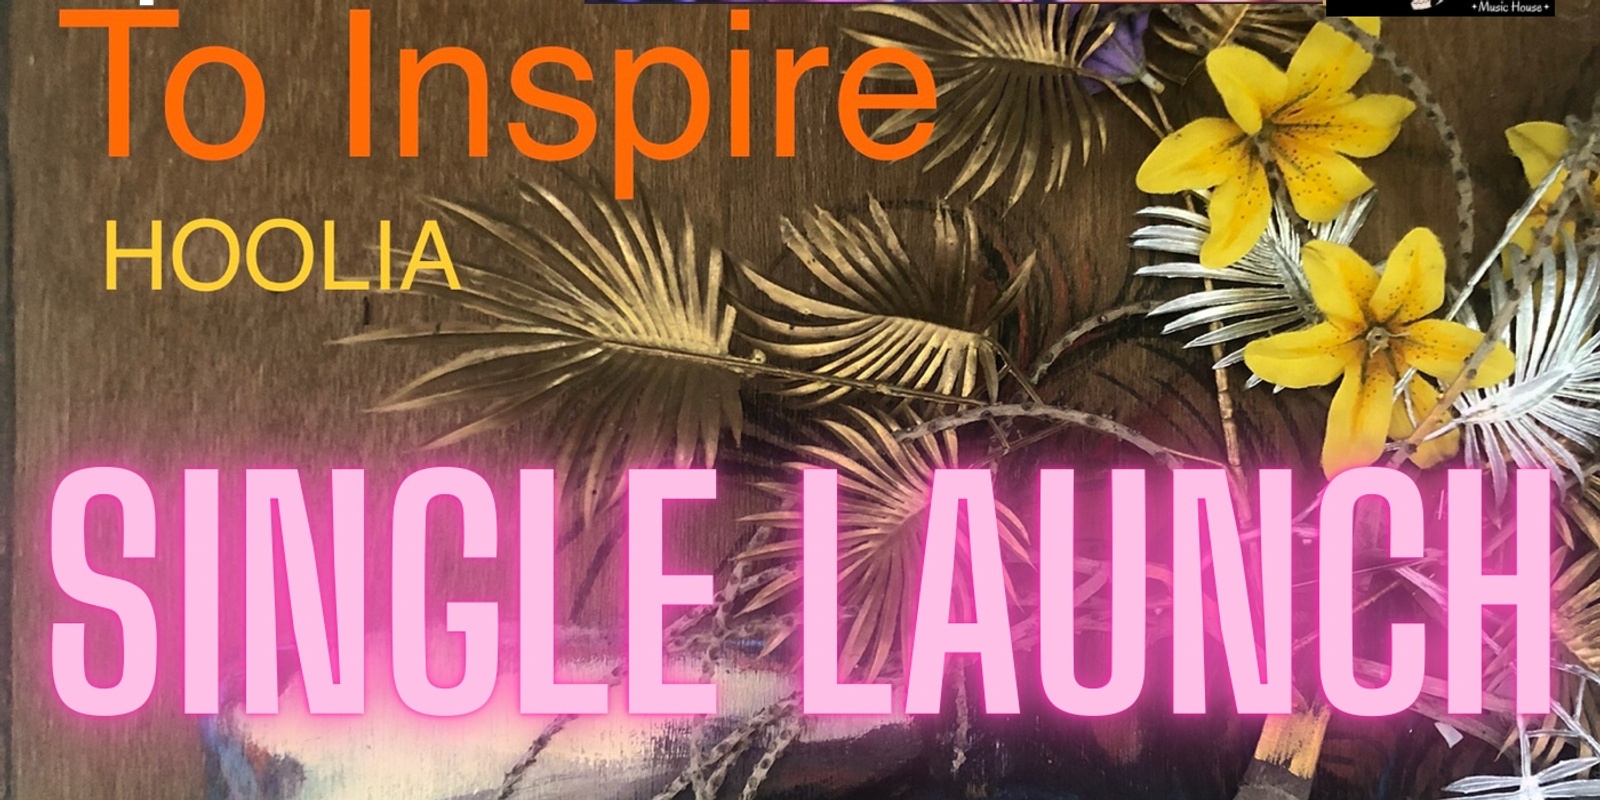 Banner image for To Inspire Single Launch